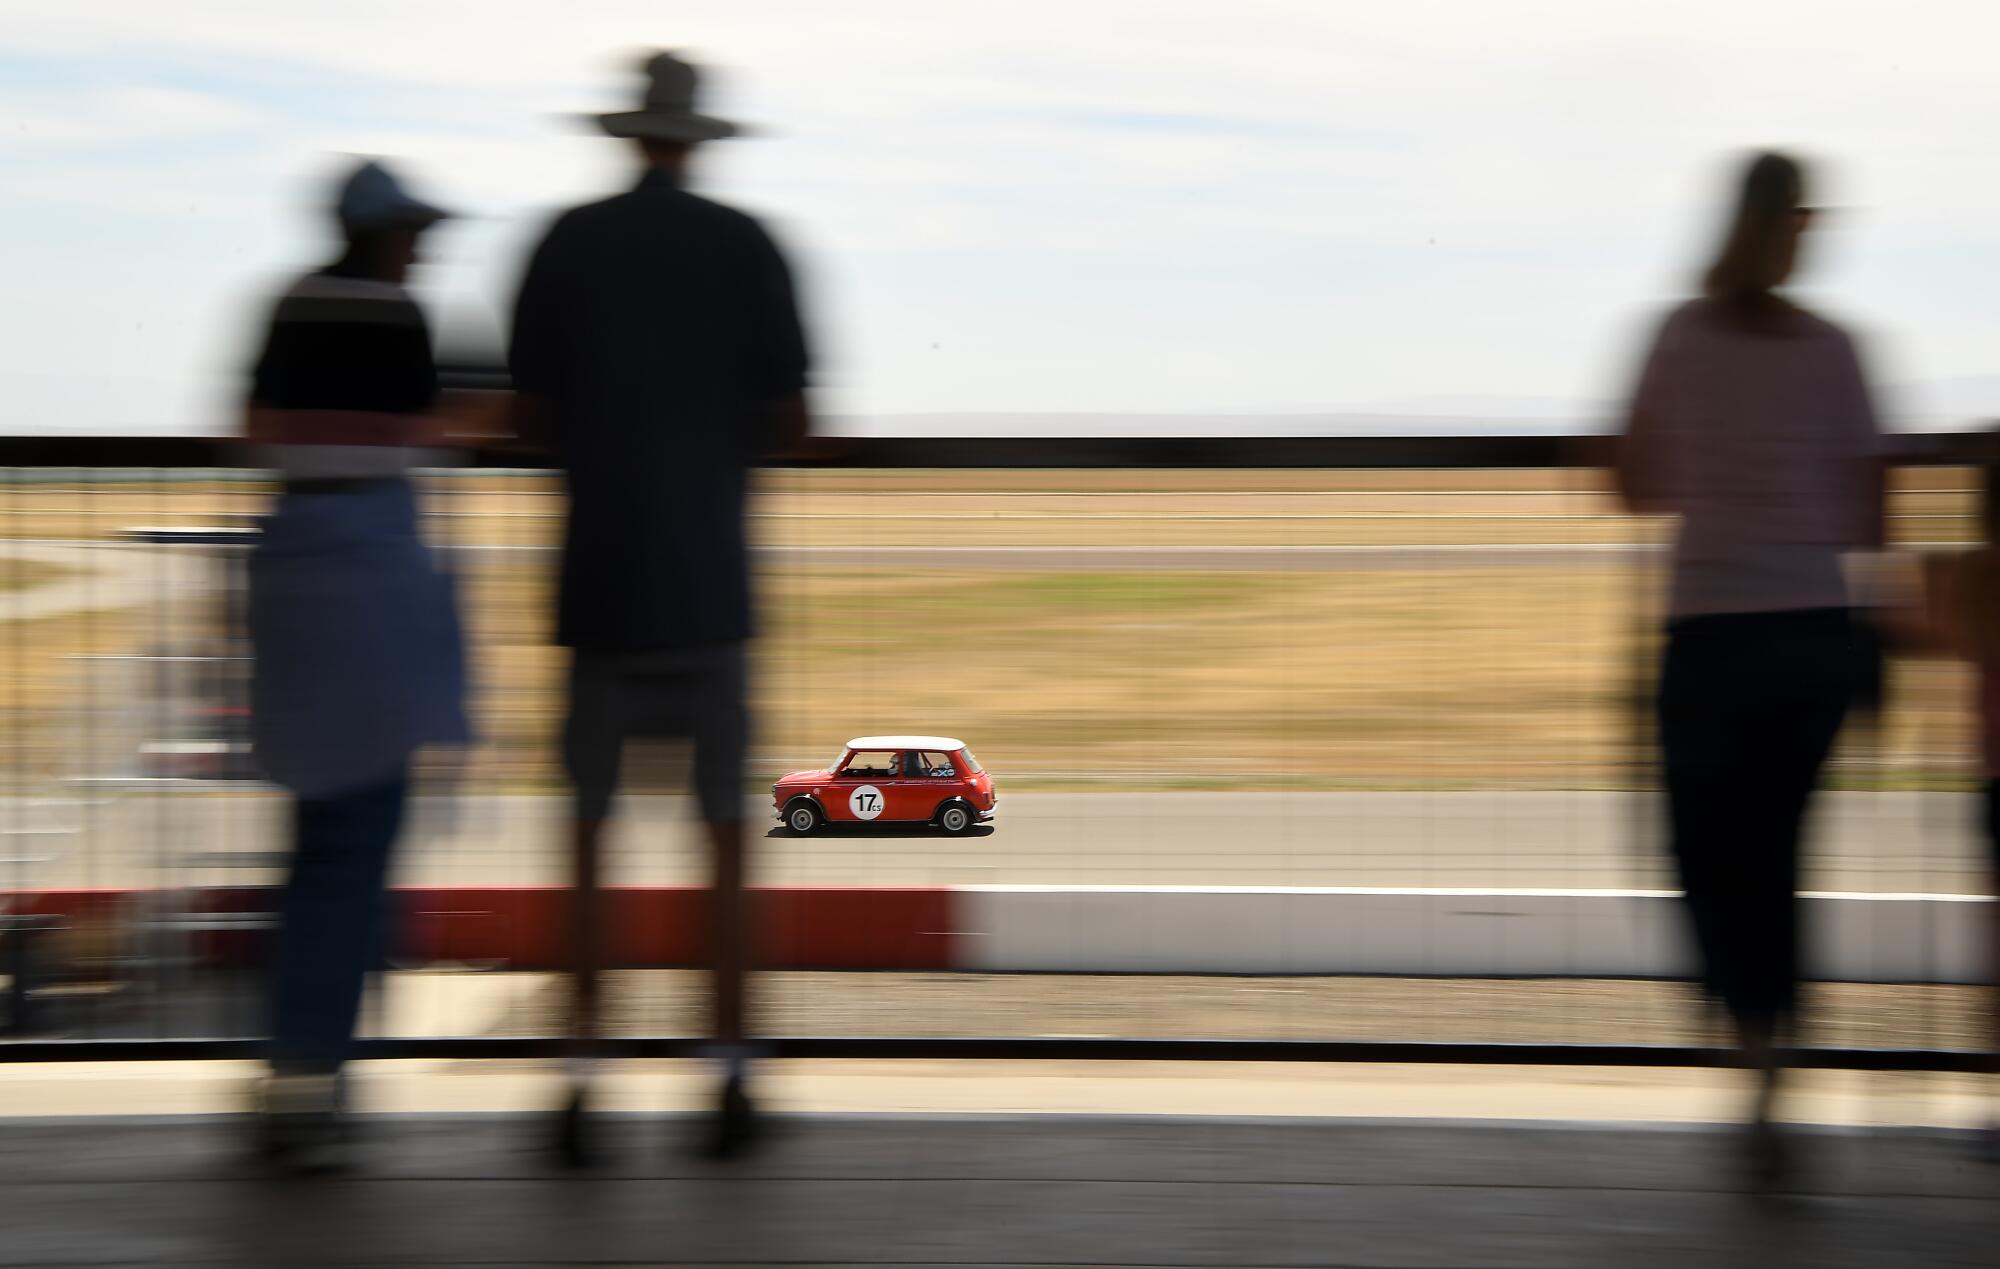 A race car makes its way around the track at Buttonwillow Raceway in Buttonwillow, Calif., on Saturday.